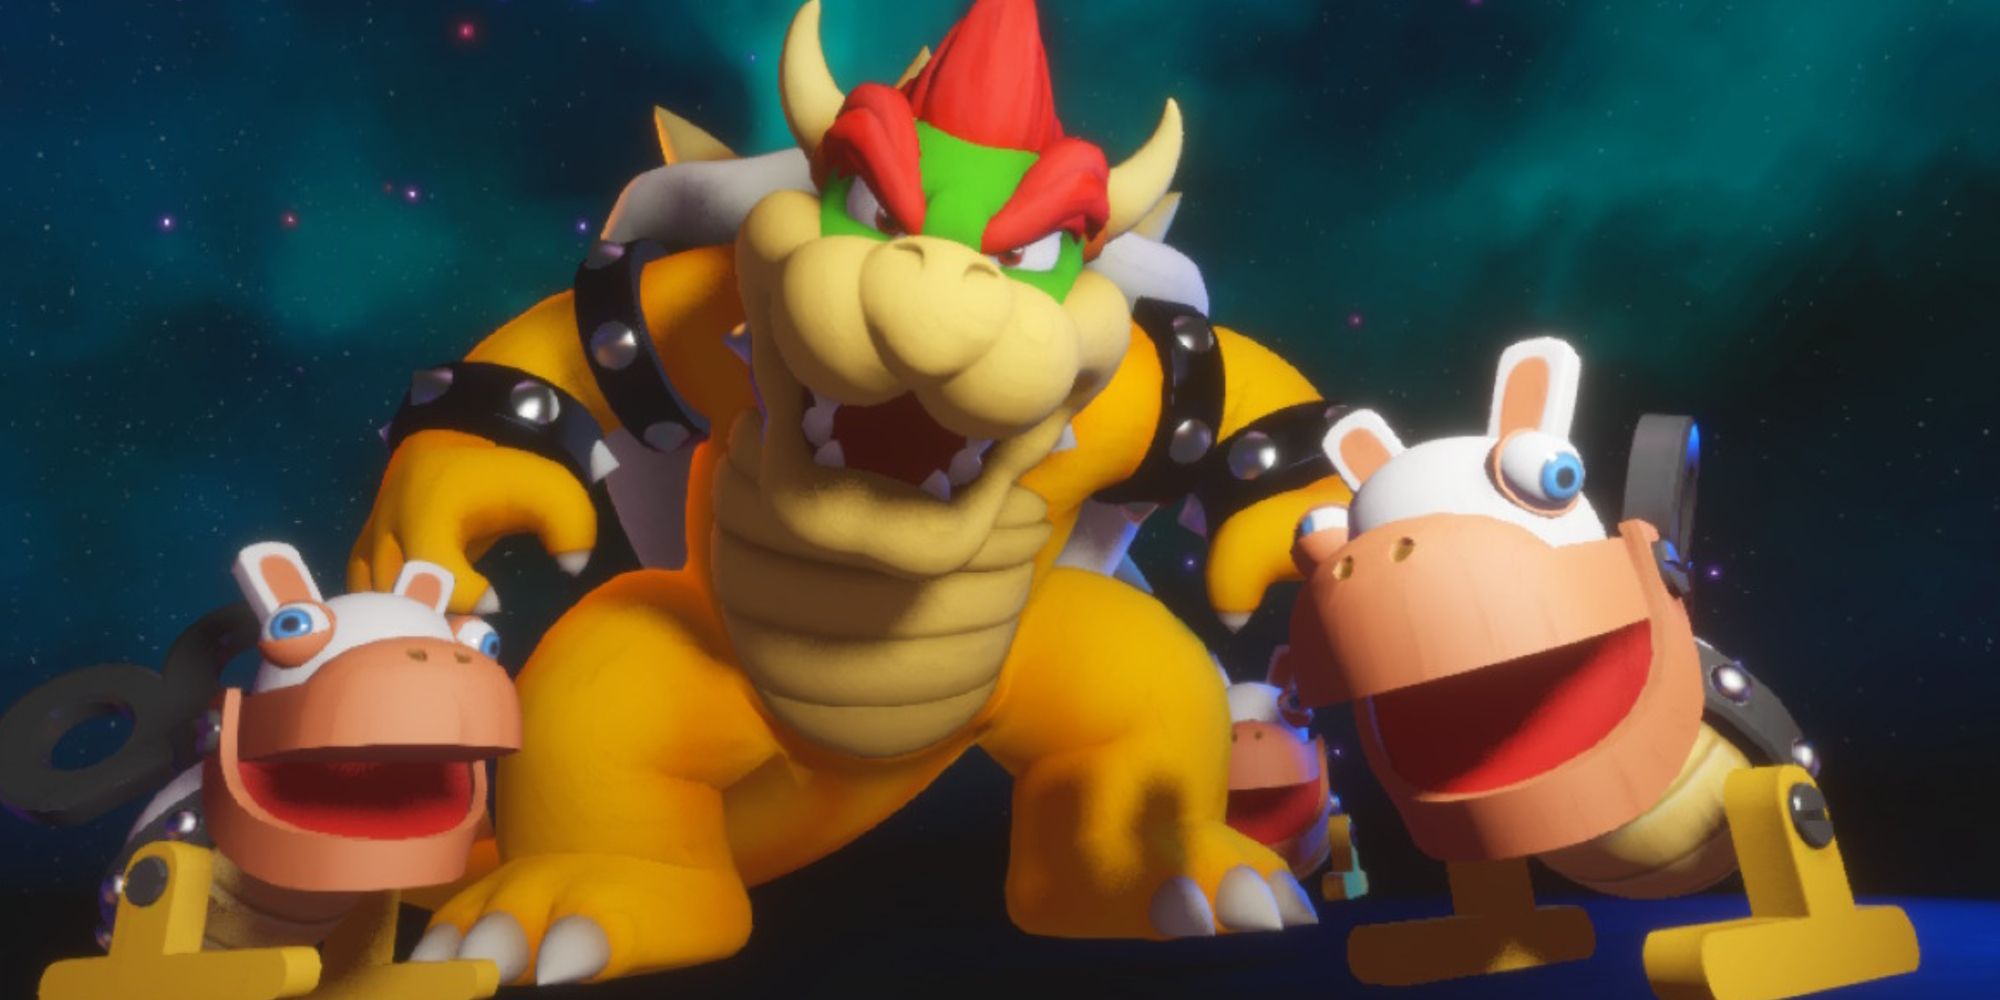 Mario Rabbids Sparks of Hope Bowser with Mechakoopas